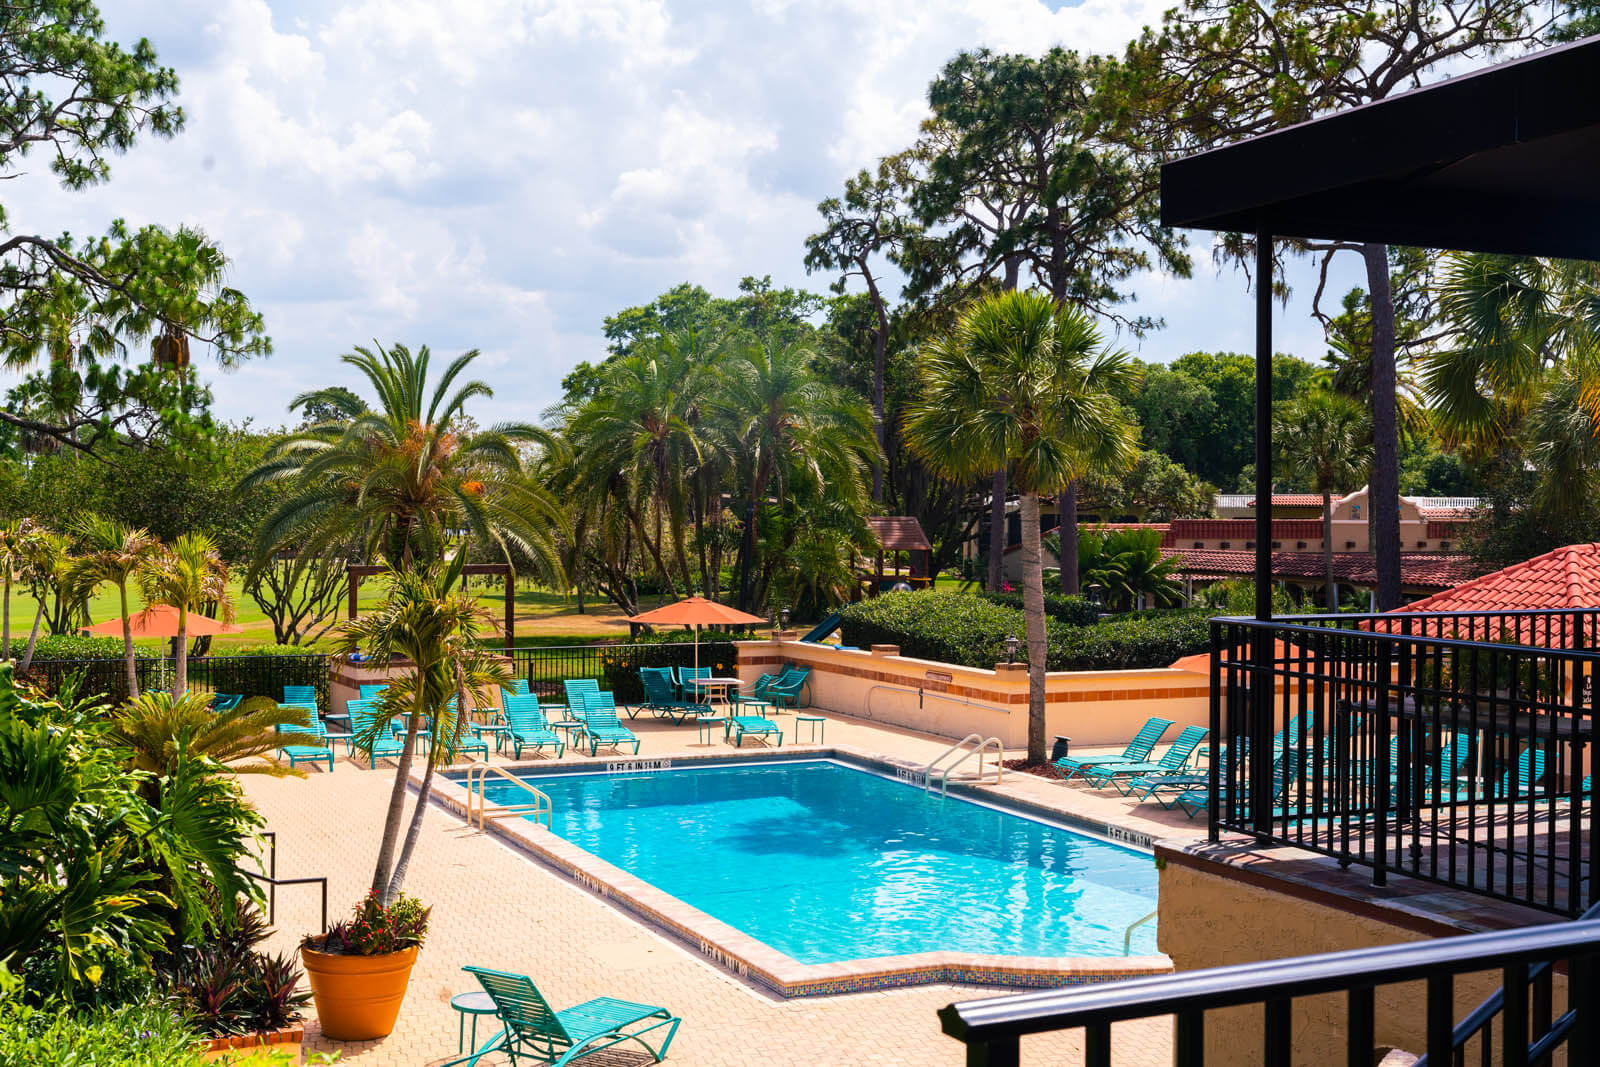 Pool at Mission Inn Resort & Club in Howey in the Hills Florida